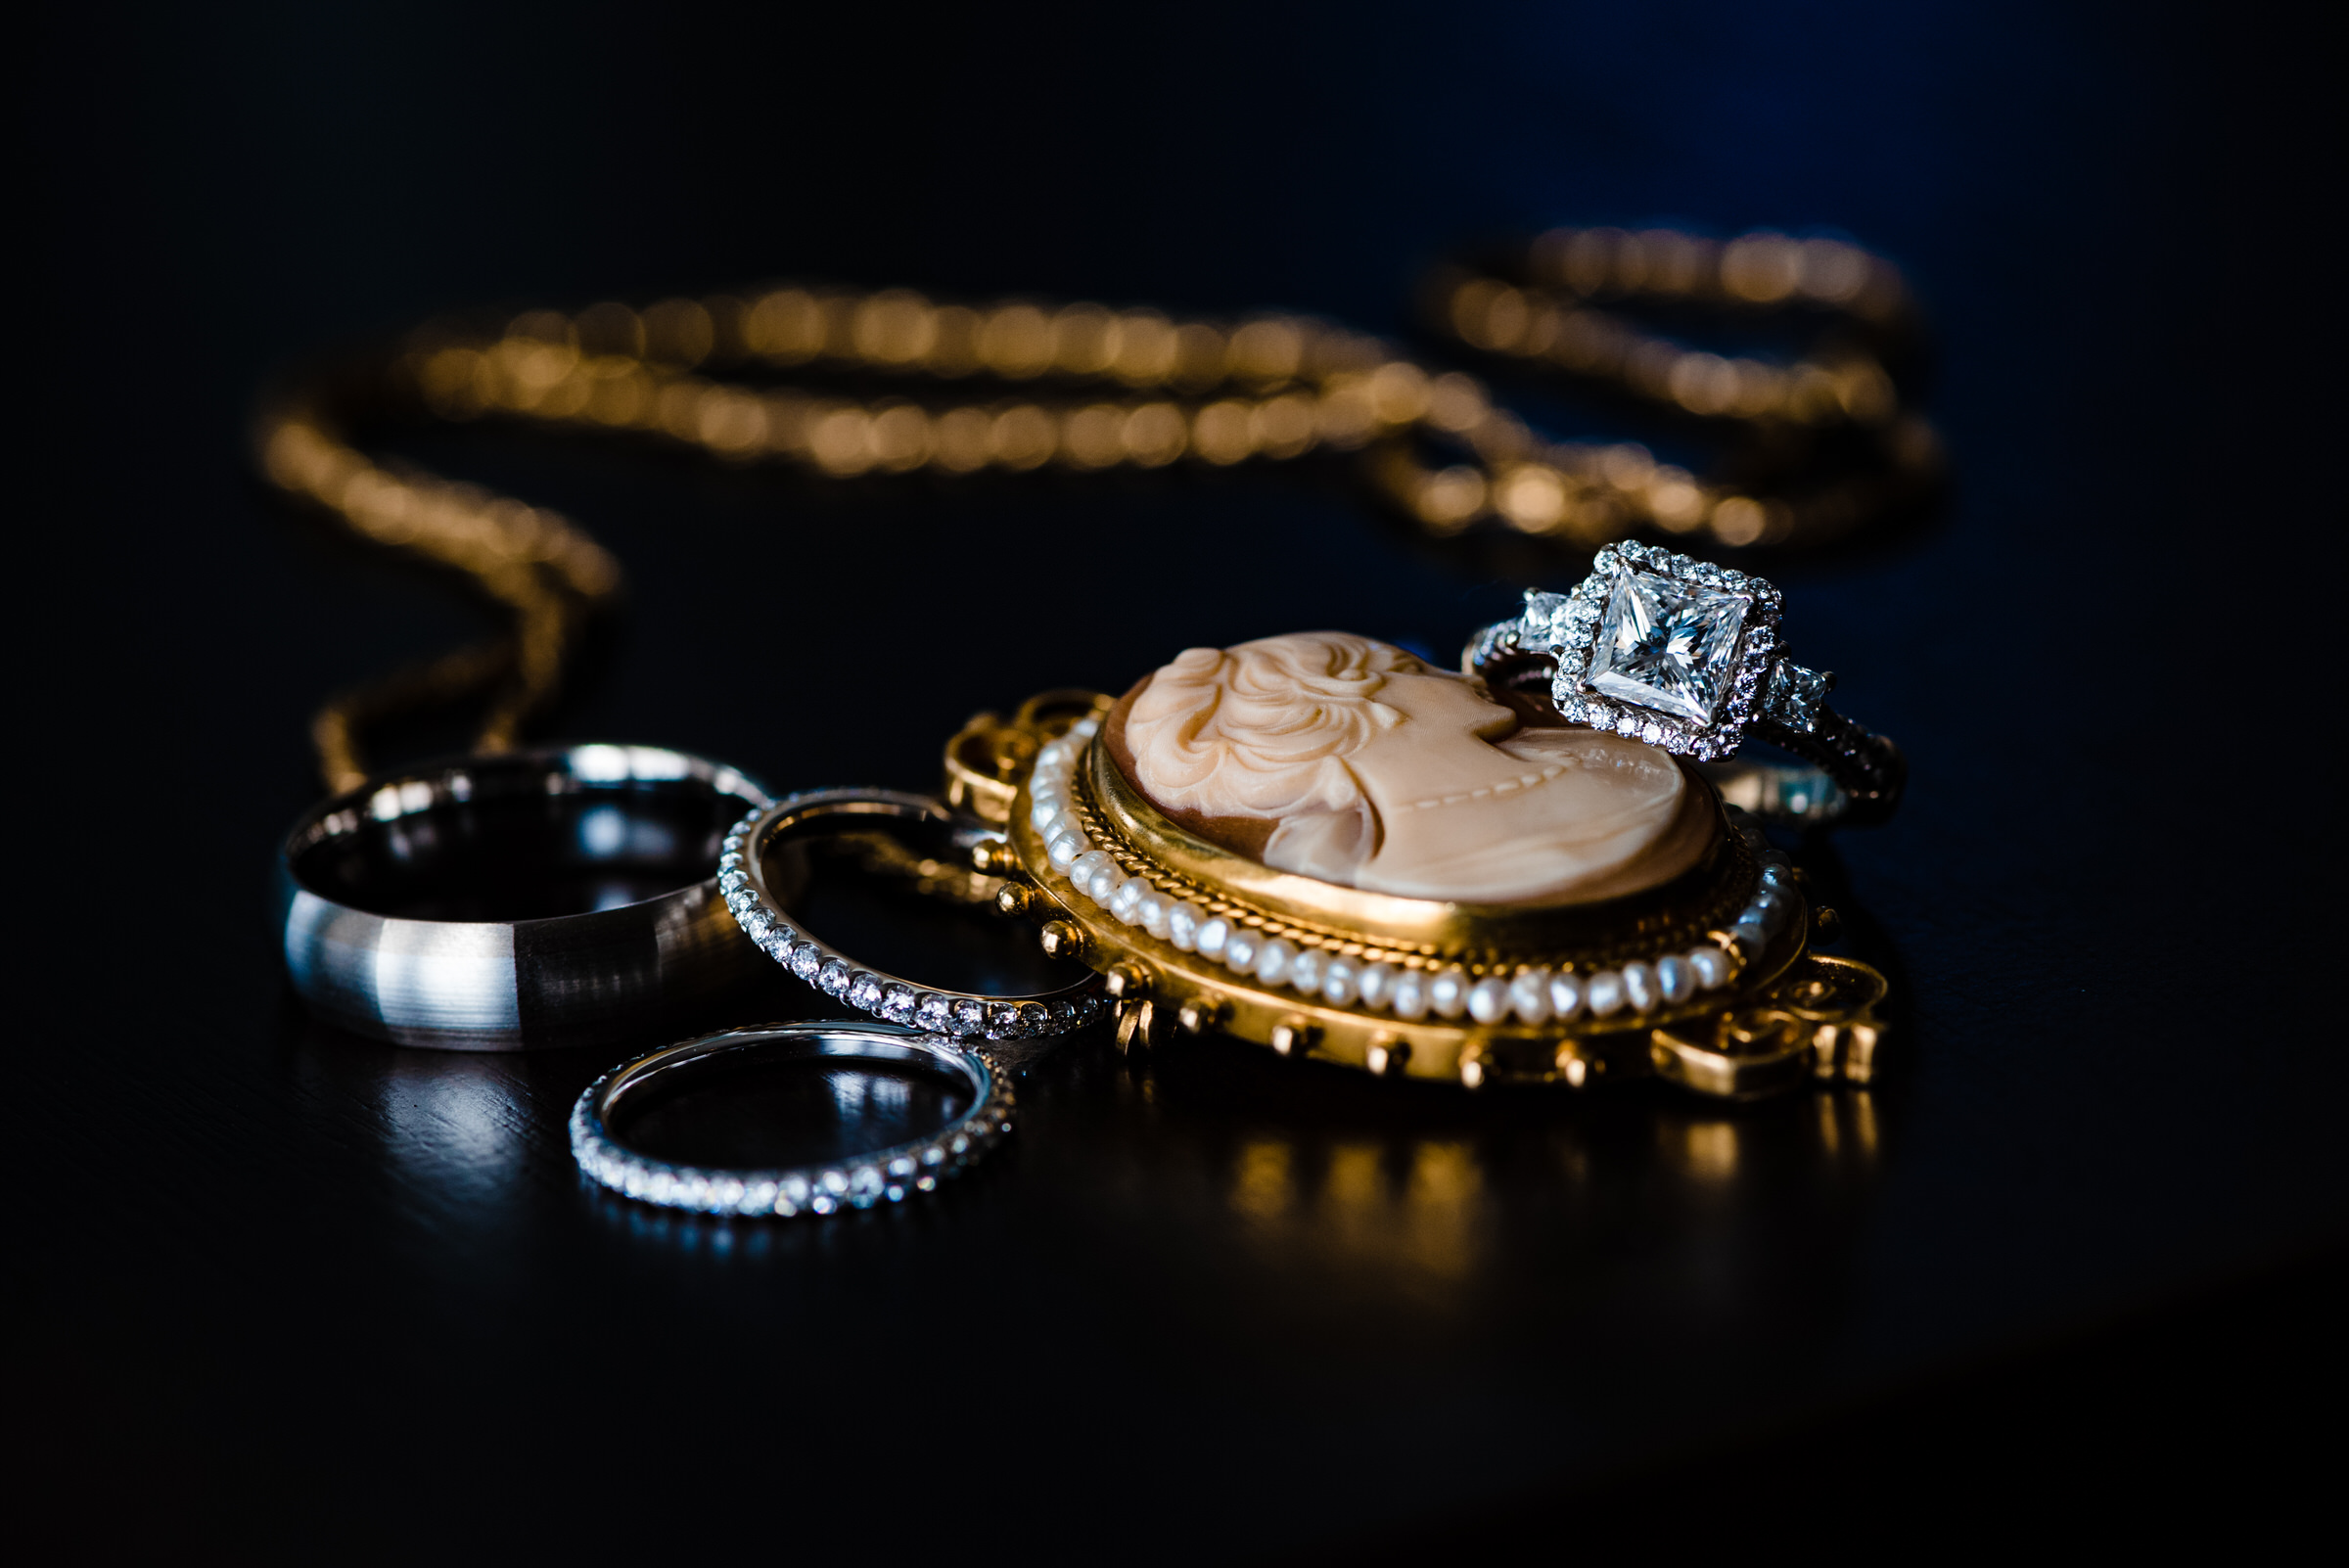 photograph of wedding rings along with the bride's heirloom jewelry by Raleigh Wedding Photographers